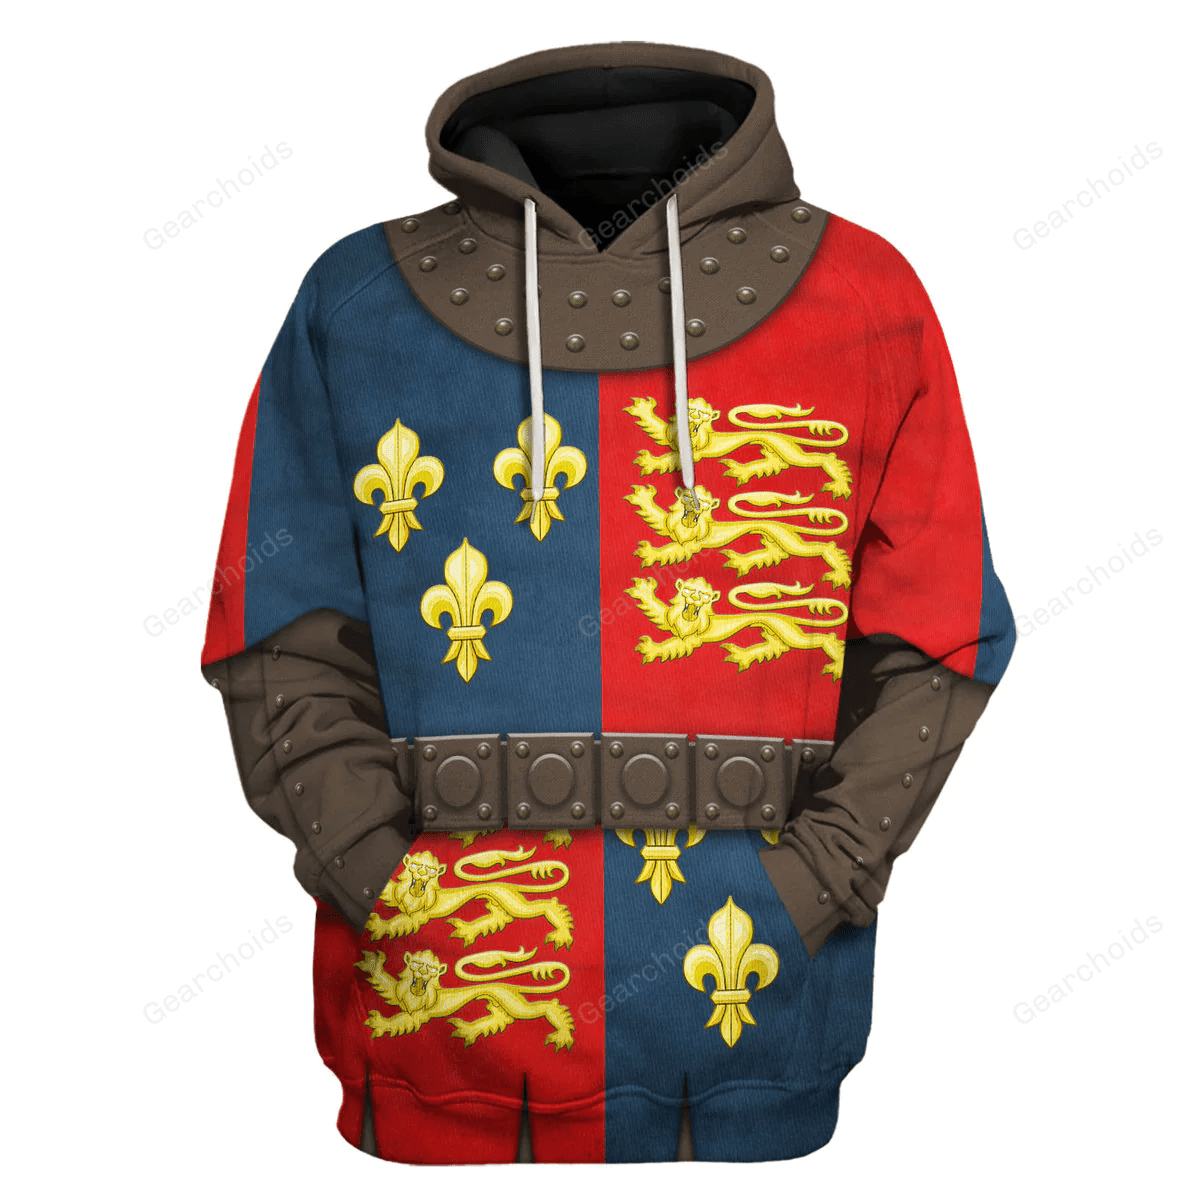 Gearchoids Henry V of England Knights Costume Hoodie Sweatshirt T-Shirt Tracksuit